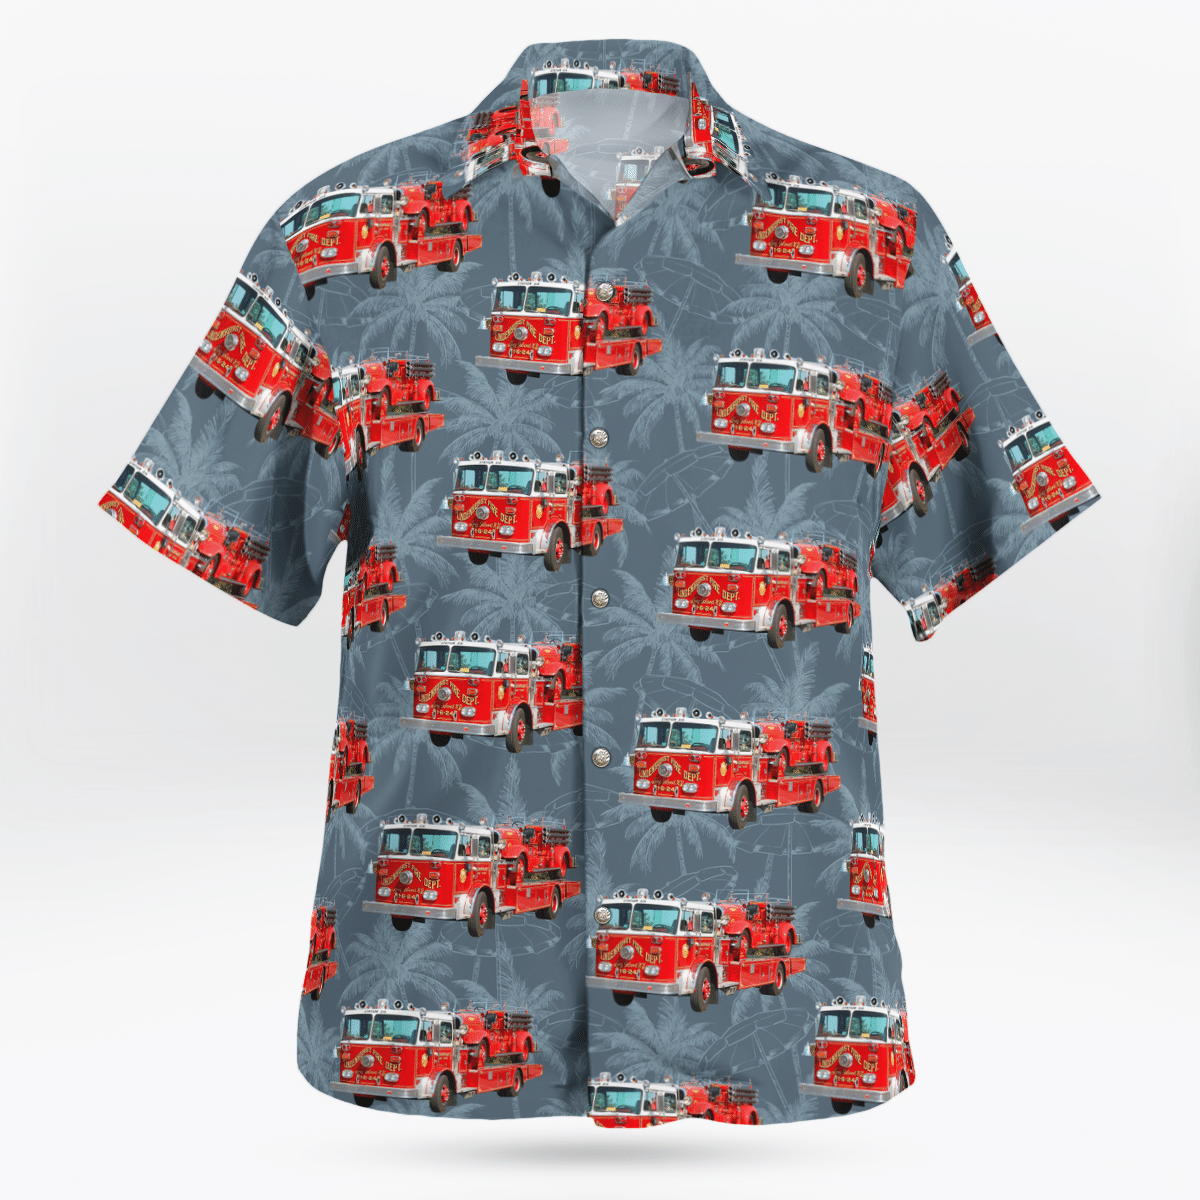 Hawaiian shirts never go out of style 198